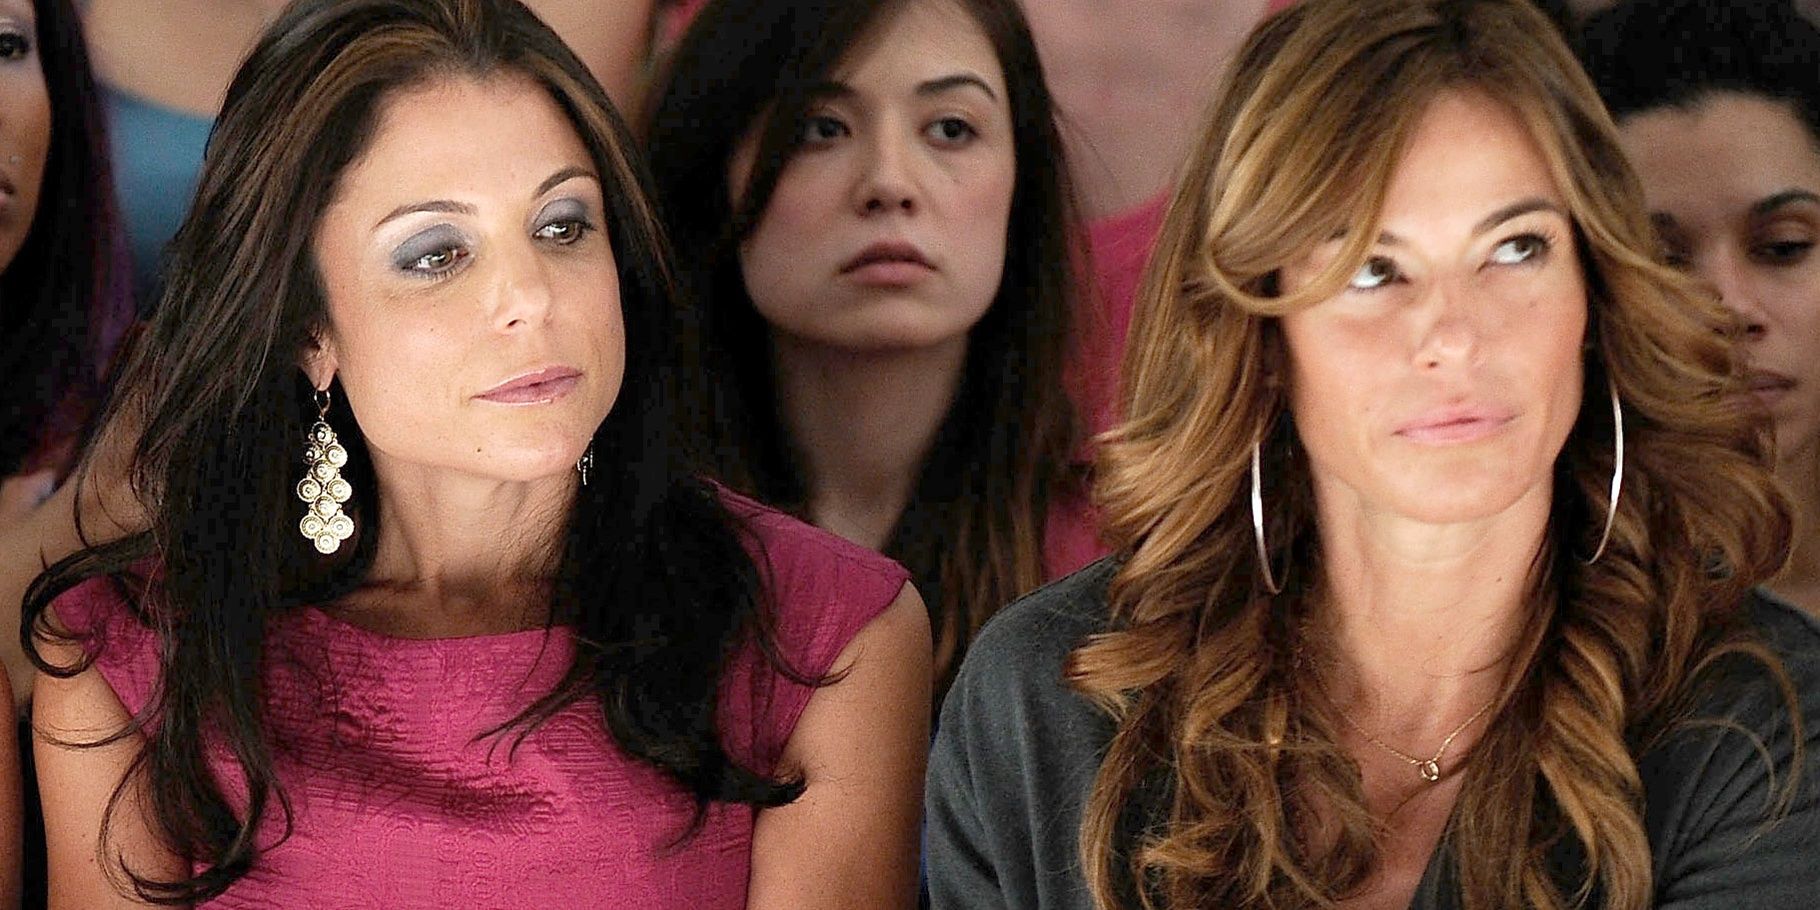 Kelly sits with Bethenny at a runway fashion show in RHONY.